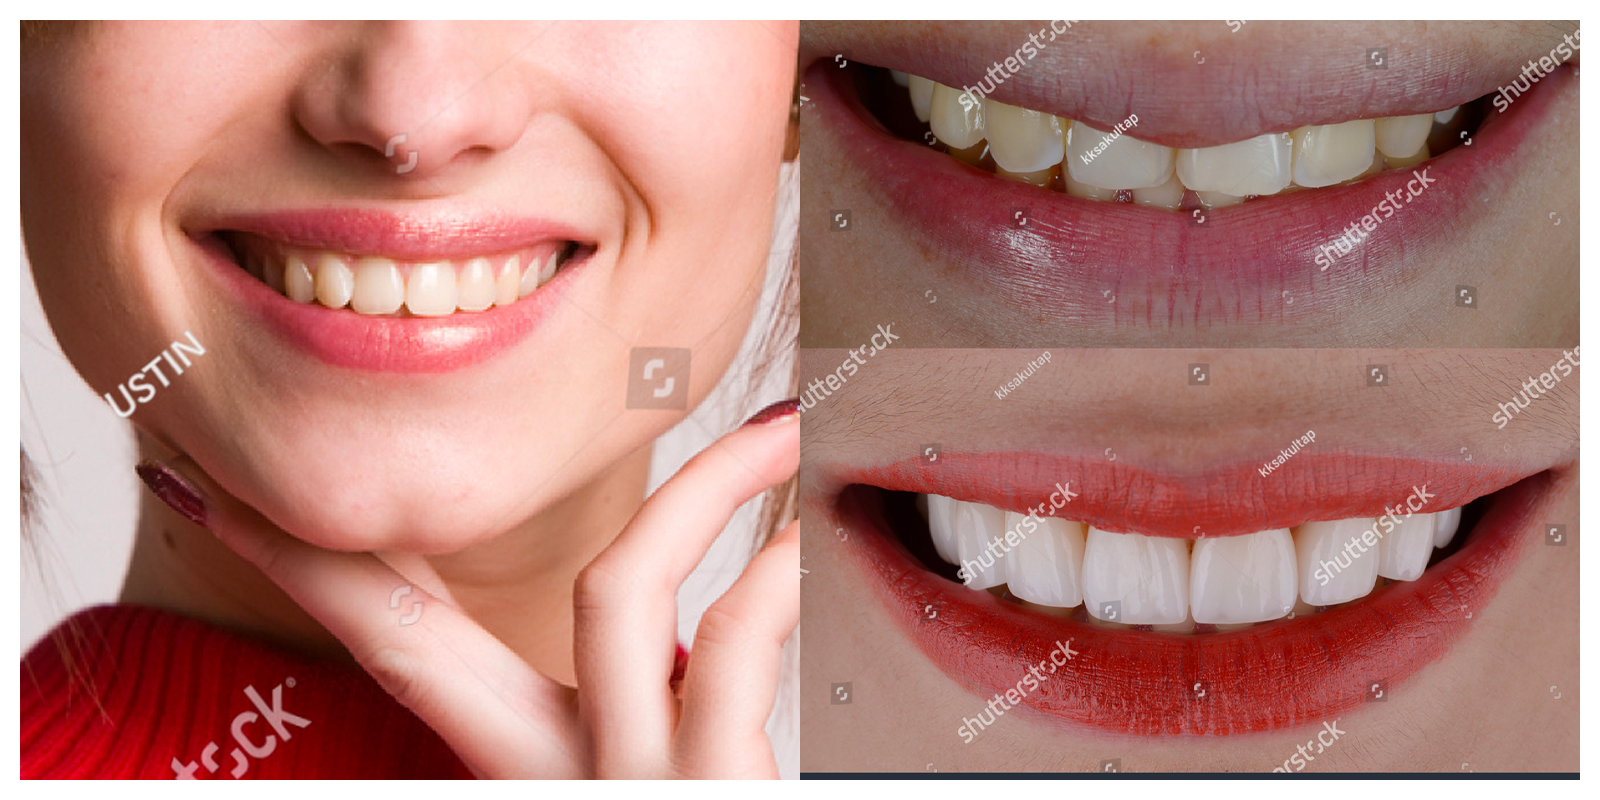 A female that had smile makeover, smiling